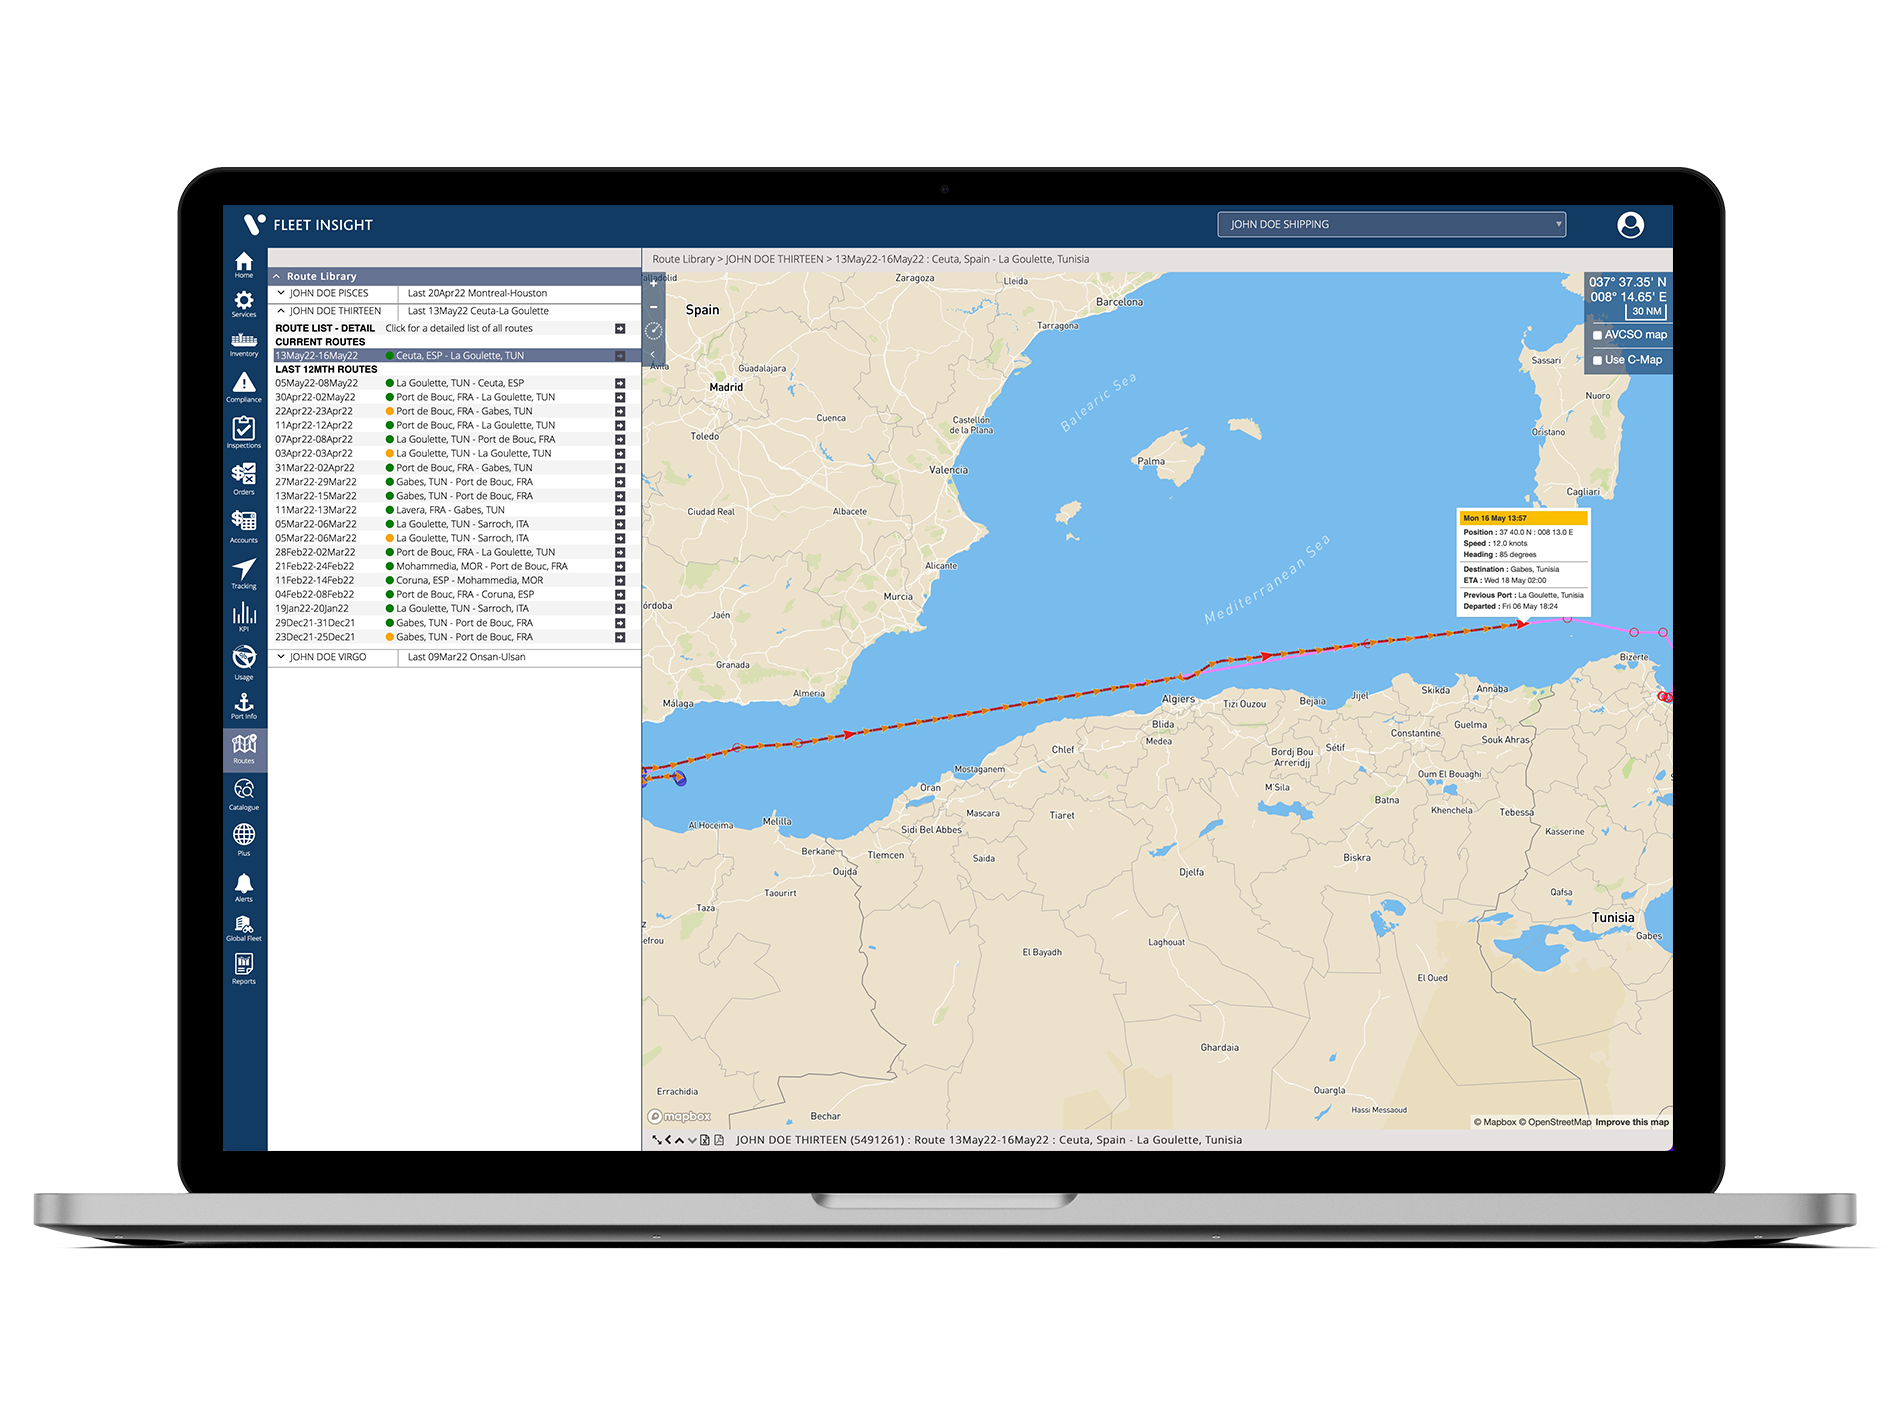 VFI vessel tracking and alerts